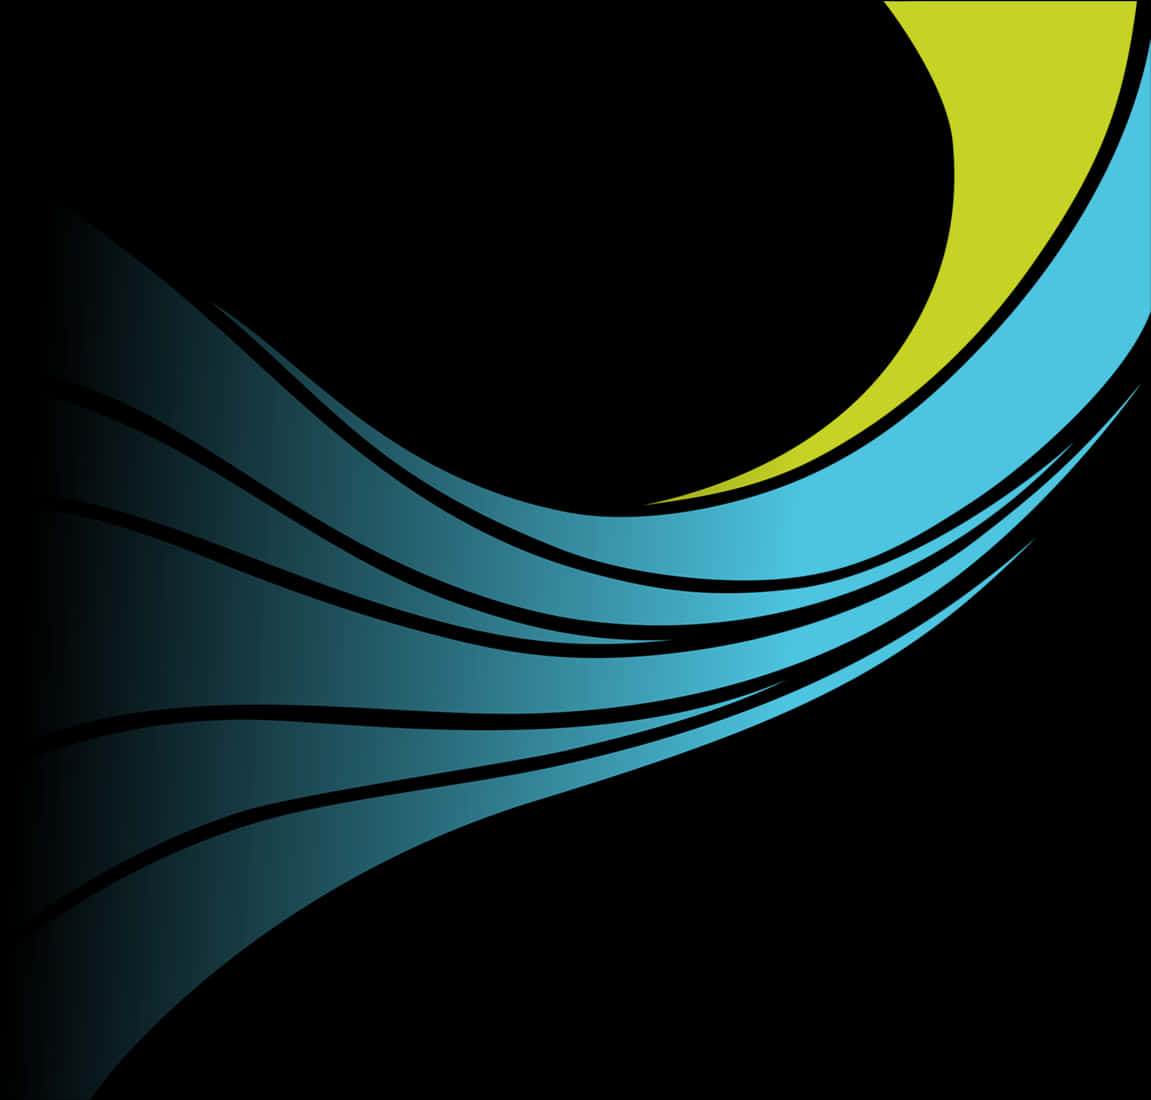 Abstract Blue Yellow Wave Design